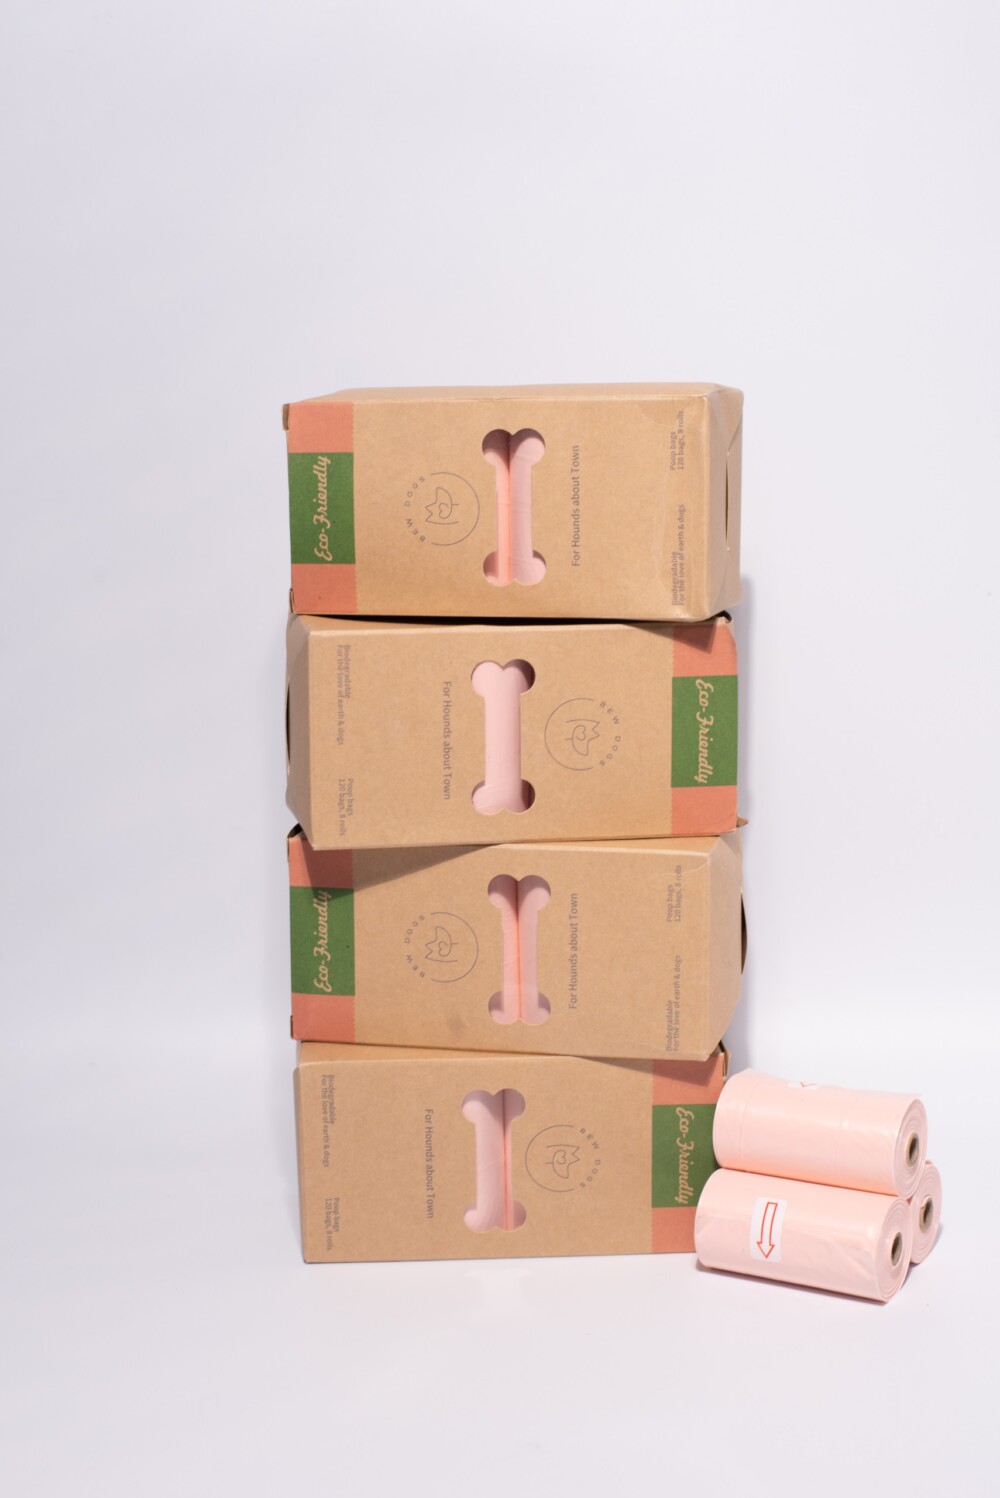 A stack of 4 boxes of eco-friendly peach coloured poop bags against a white background.